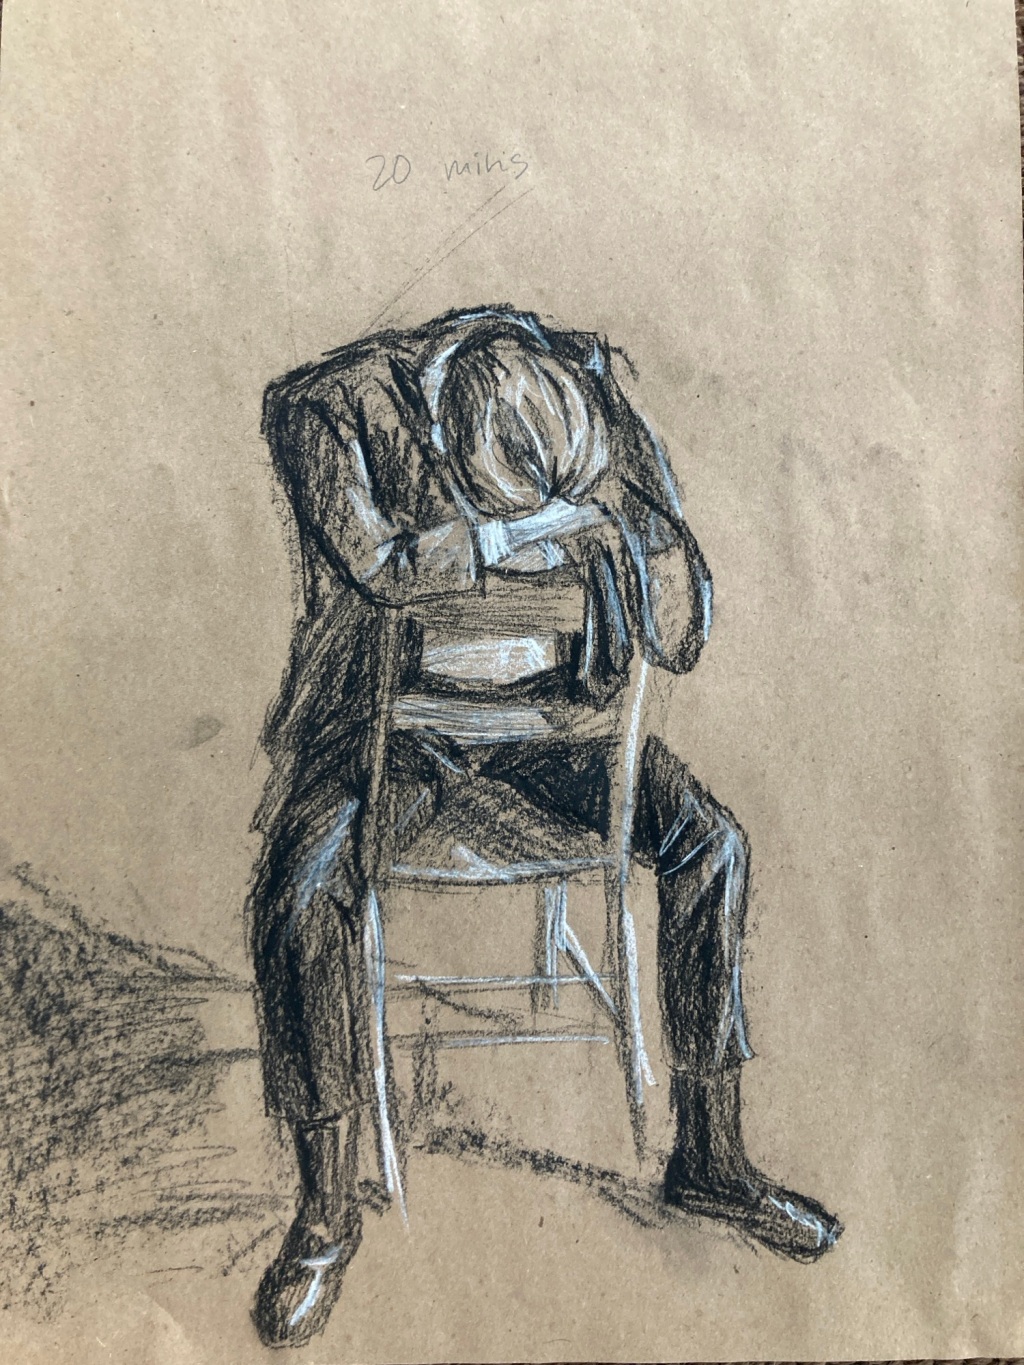 Man in chair